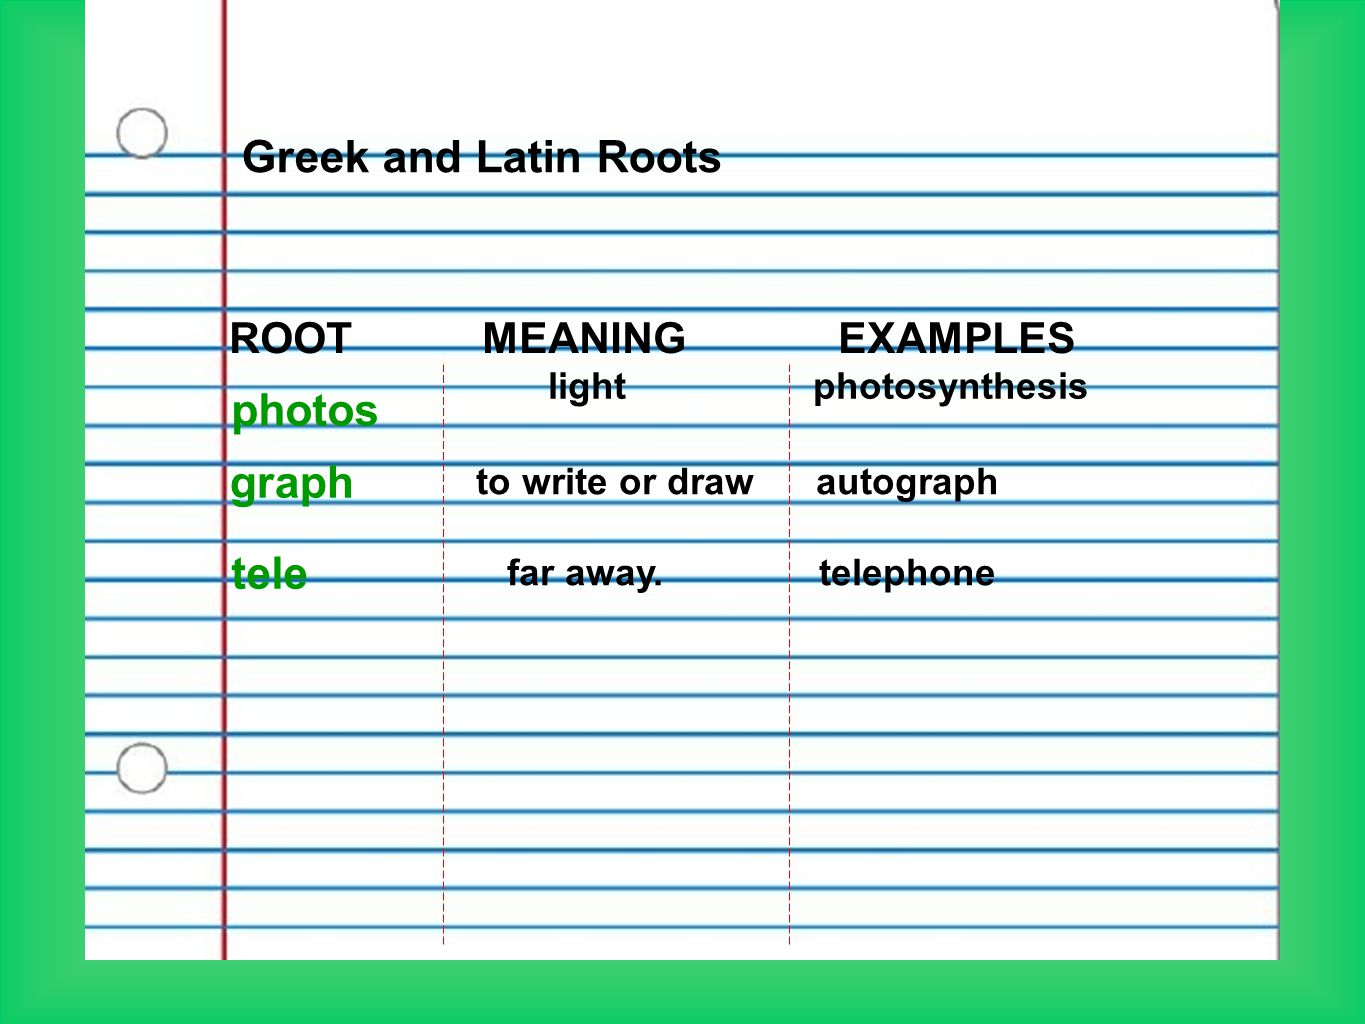 Greek and Latin Roots photos graph tele ROOT MEANING EXAMPLES